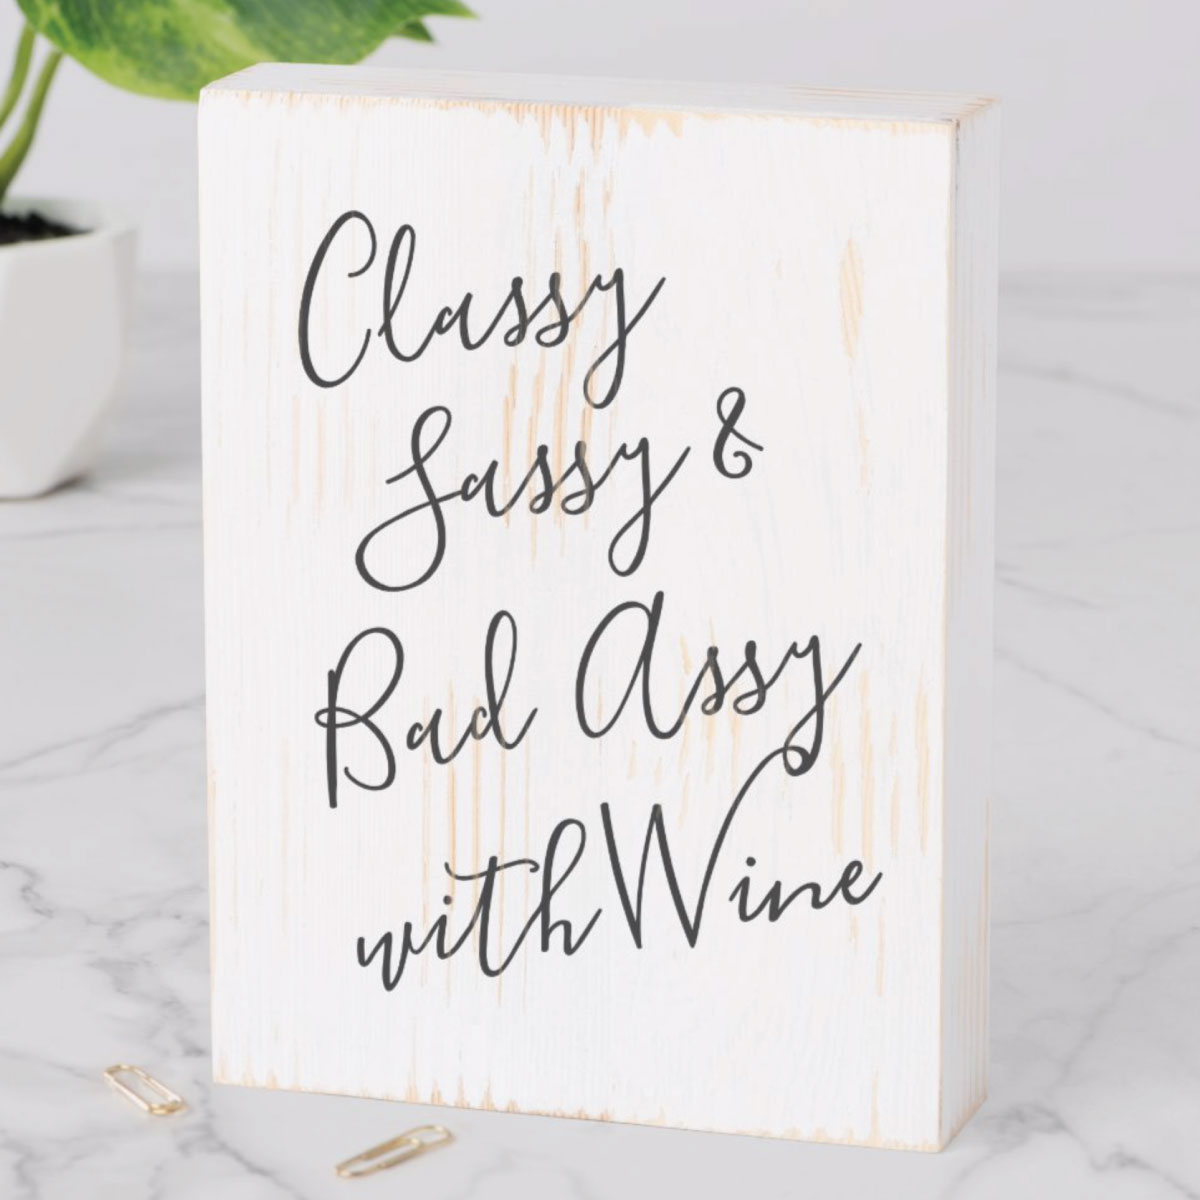 Funny wine tasting sign that says "Classy, Sassy and Bad Assy with Wine" Click to see more.